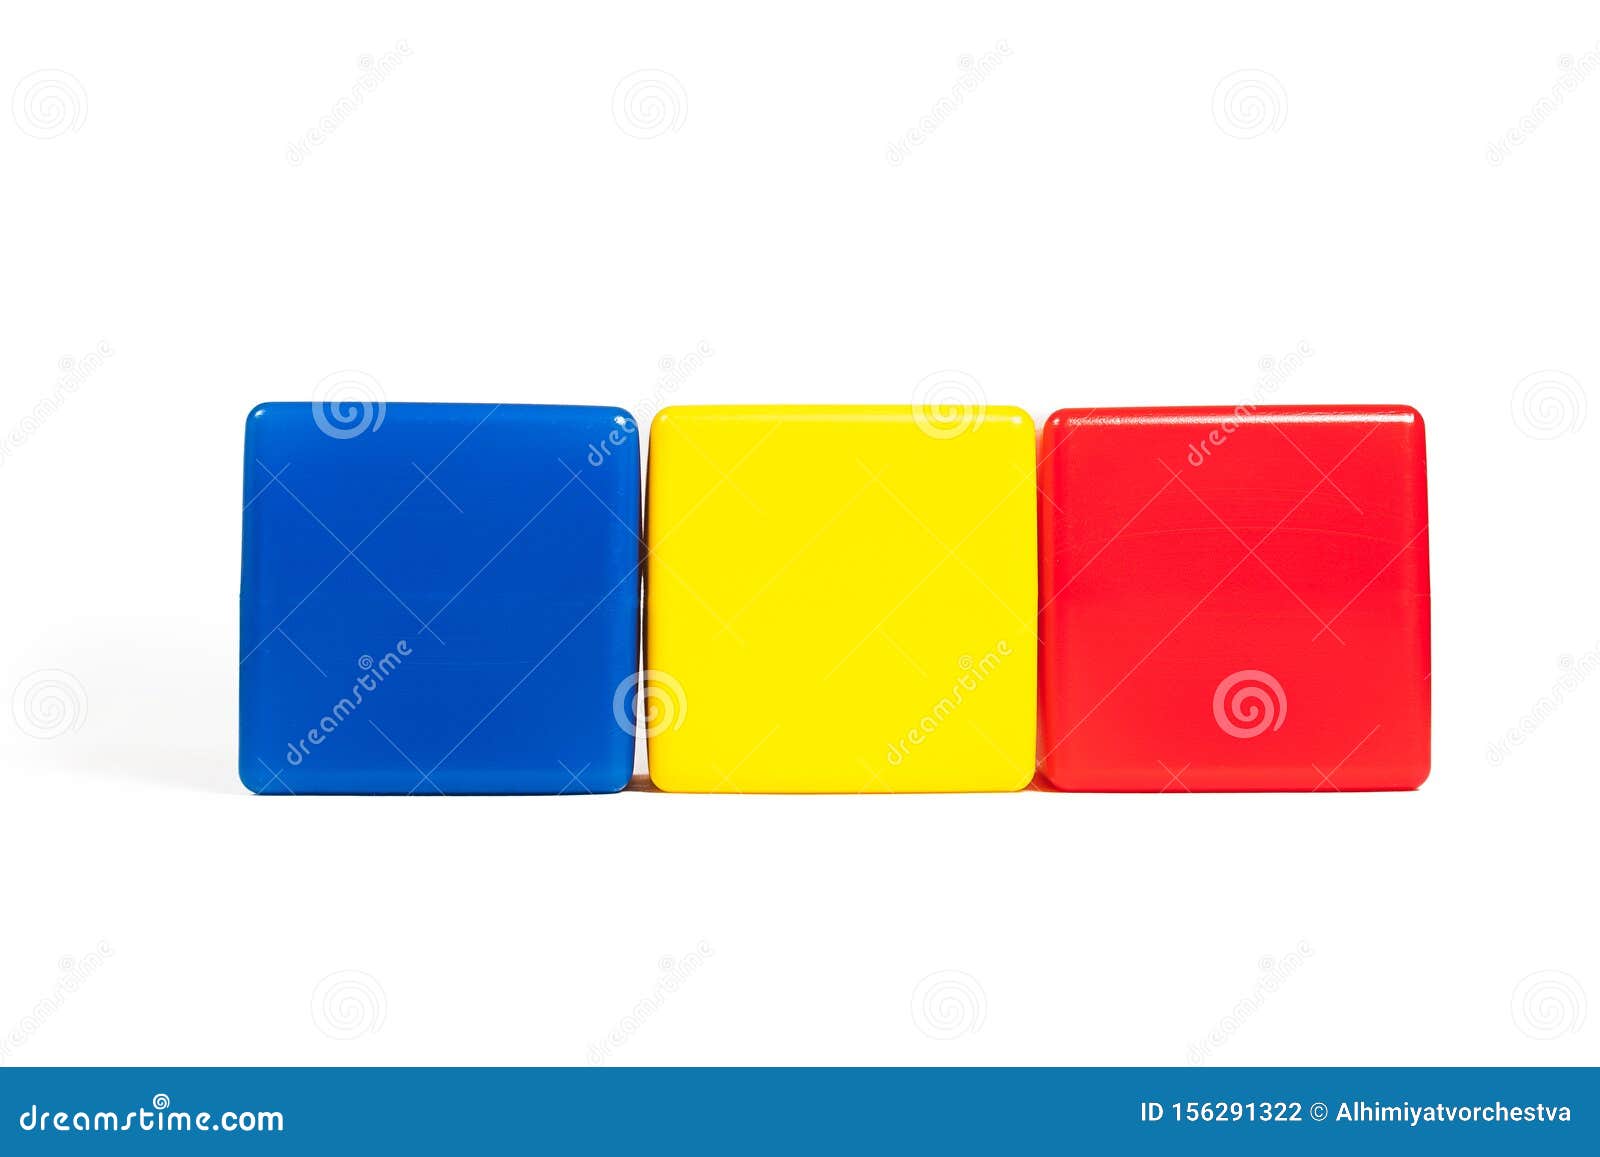 rumania flag colors: blue, yellow, red in the form of children`s cubes.